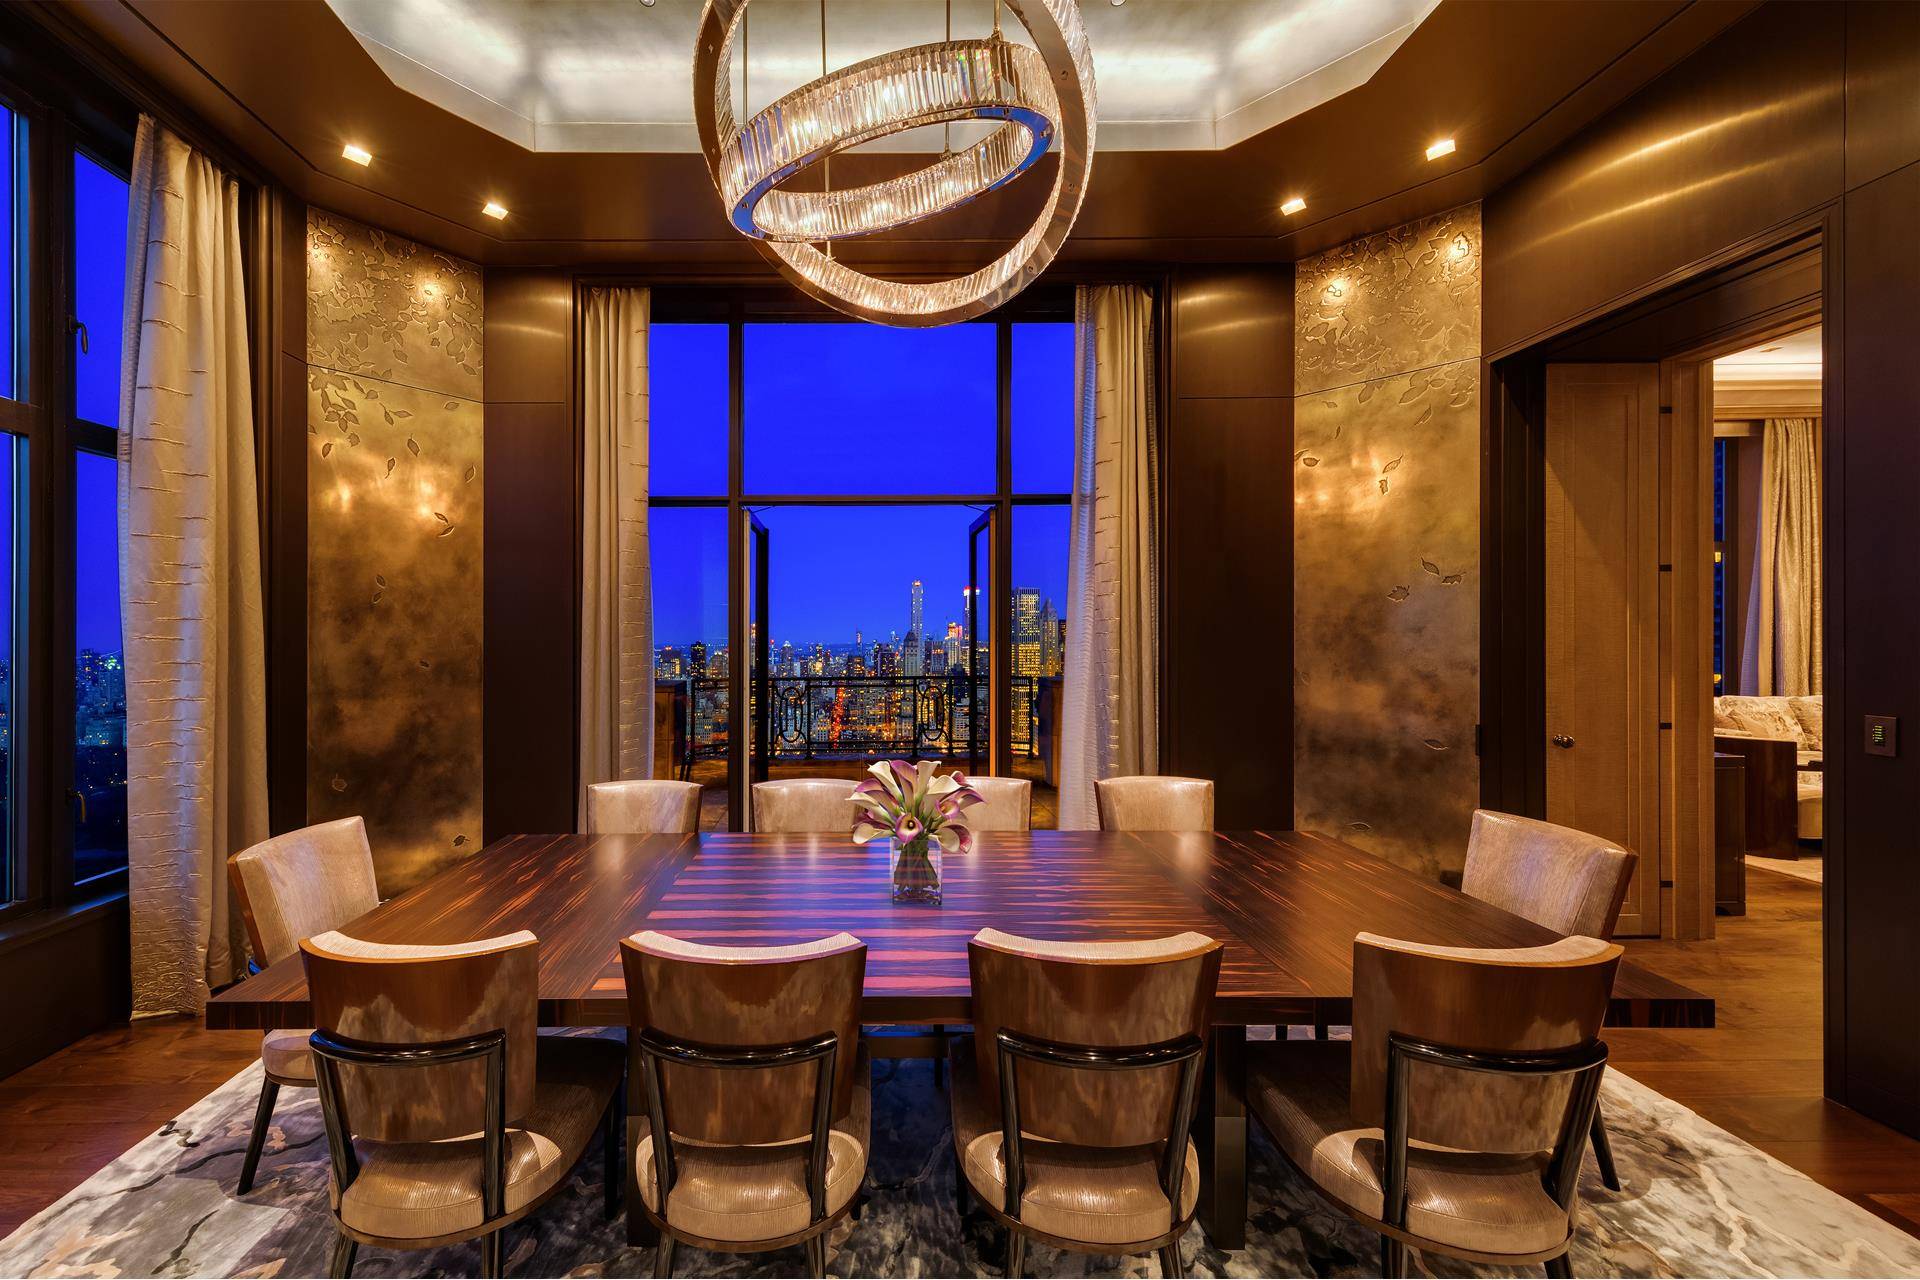 CROWN JEWEL PENTHOUSE AT 15 CENTRAL PARK WEST, THE MOST ICONIC RESIDENTIAL CONDOMINIUM BUILDING IN THE WORLD Live Like Royalty in a Rare Gem Penthouse Featuring Spectacular Unobstructed Views.